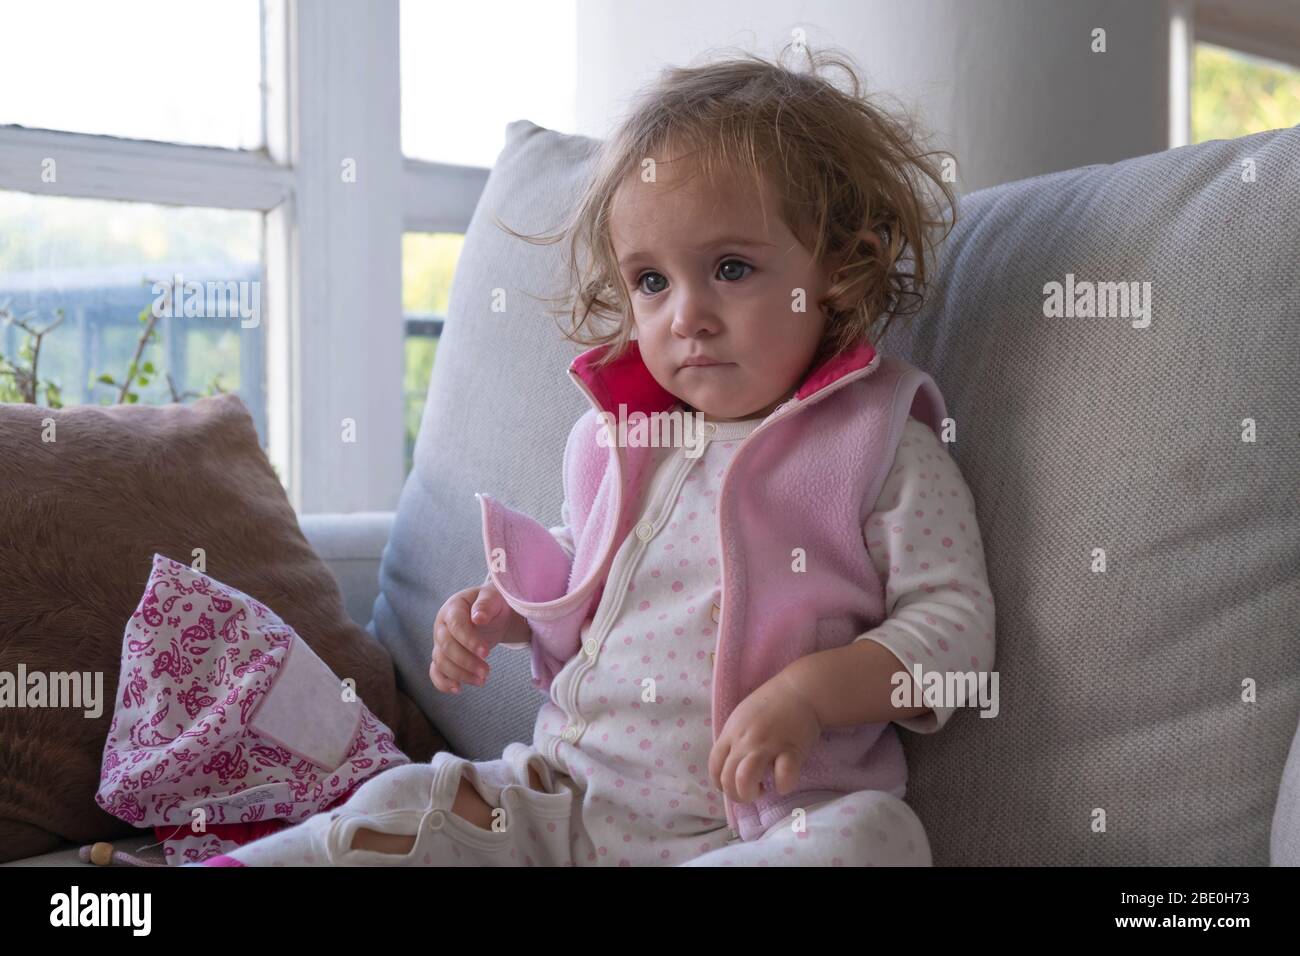 Little girl concentrate watching tv alone in her living room. Stock Photo